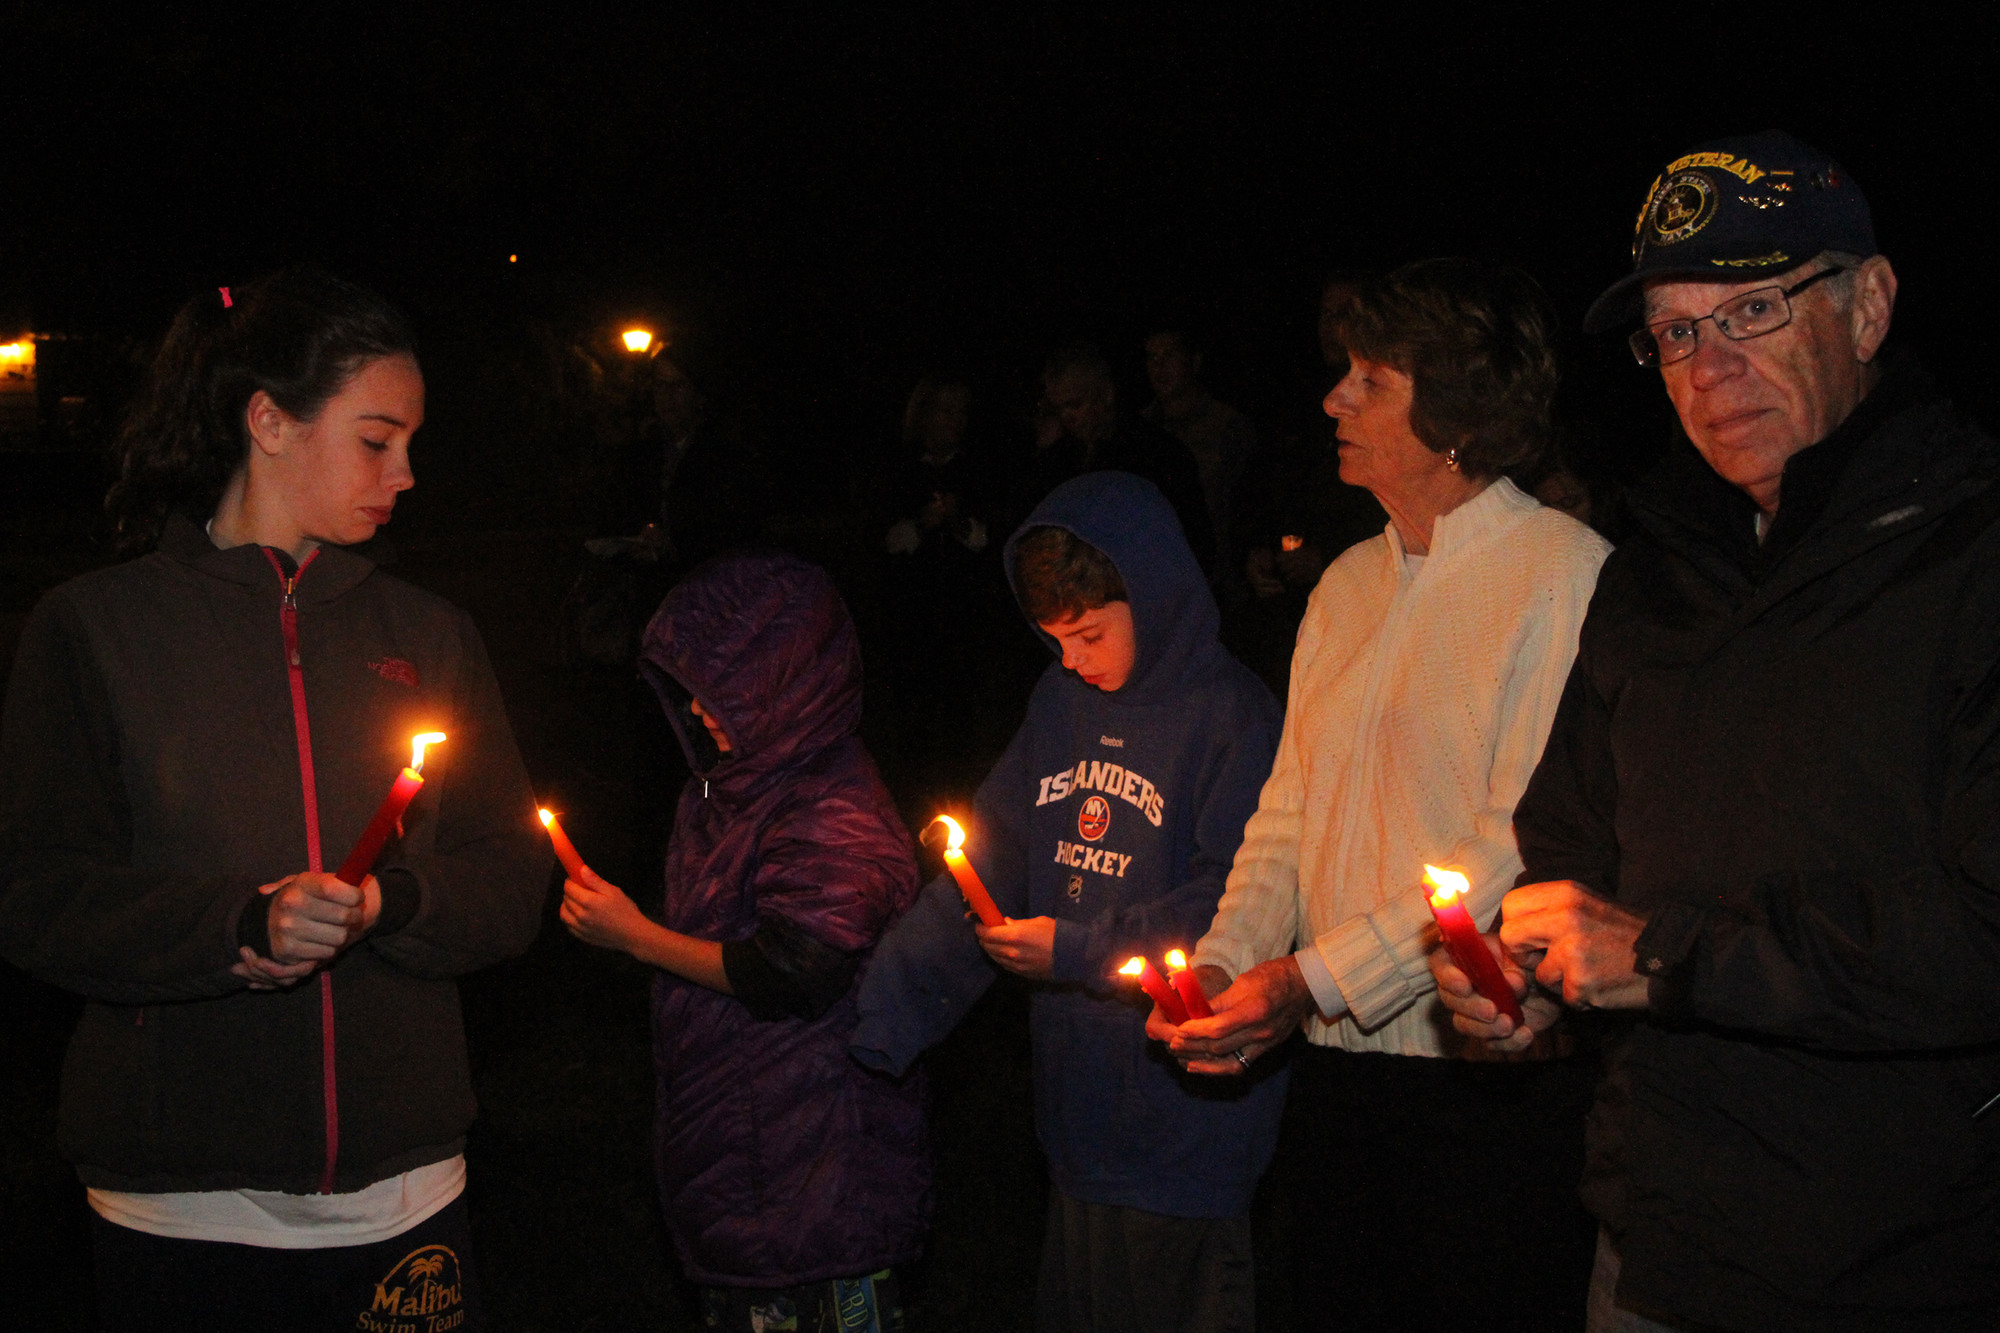 The Rinn family lit candles in memory of those from Rockville Centre who died on Sept. 11.